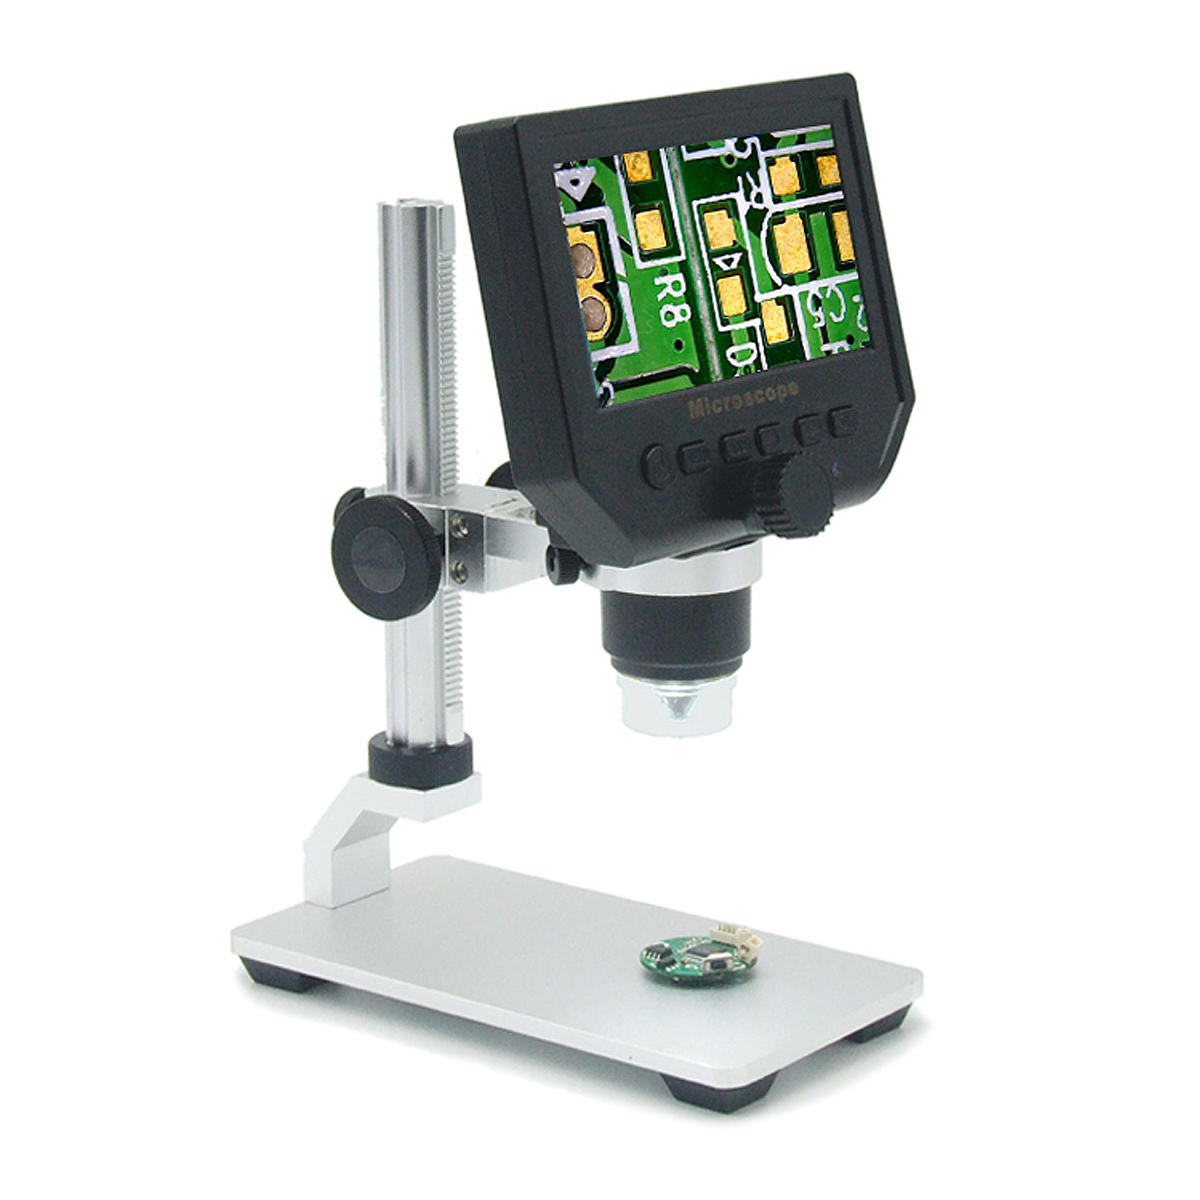 Mustool G600 Digital 1-600X 3.6MP 4.3inch HD LCD Display Microscope Continuous Magnifier with Aluminum Alloy Stand Upgrade Version 41